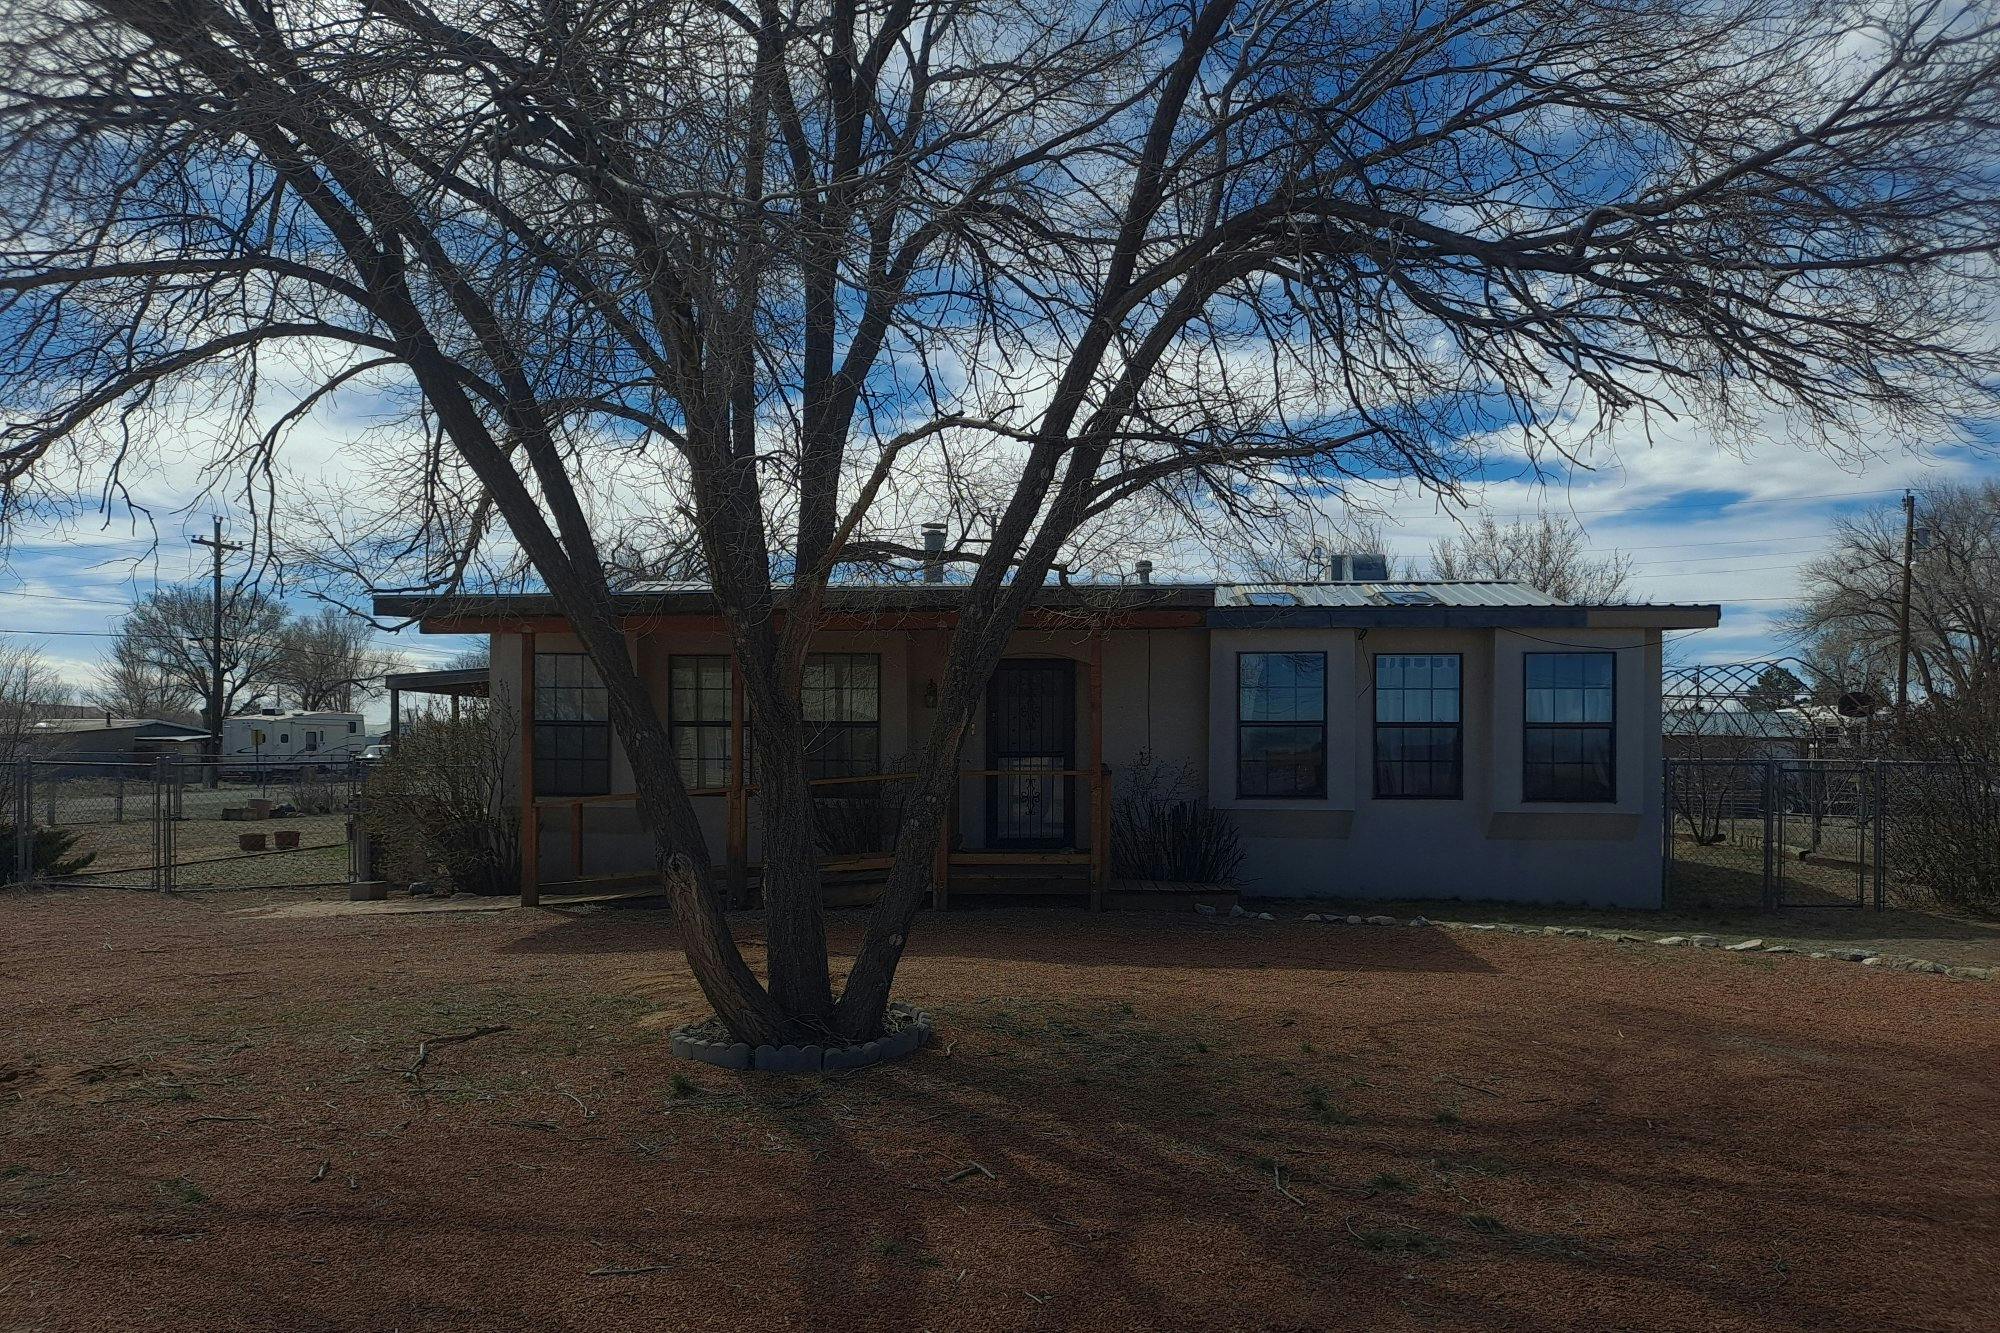 Katherine Ave, Moriarty, NM 87035